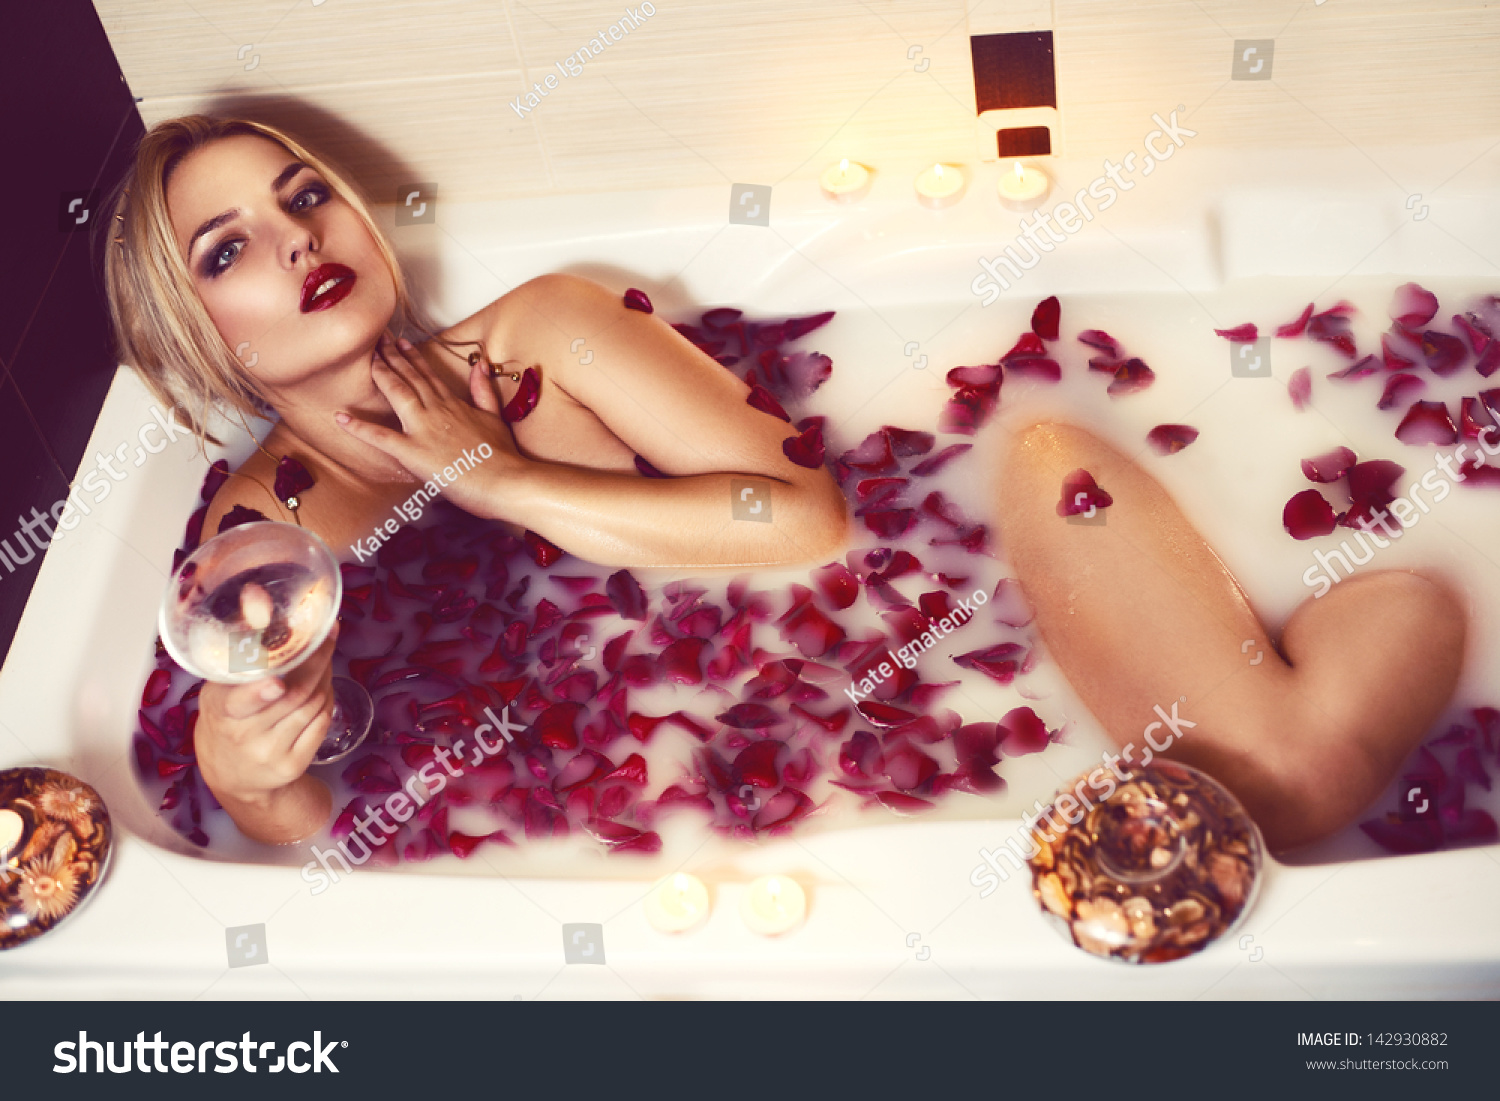 Stock photo sexy beautiful naked brunette woman laying in a bath with milk and red romantic falling rose